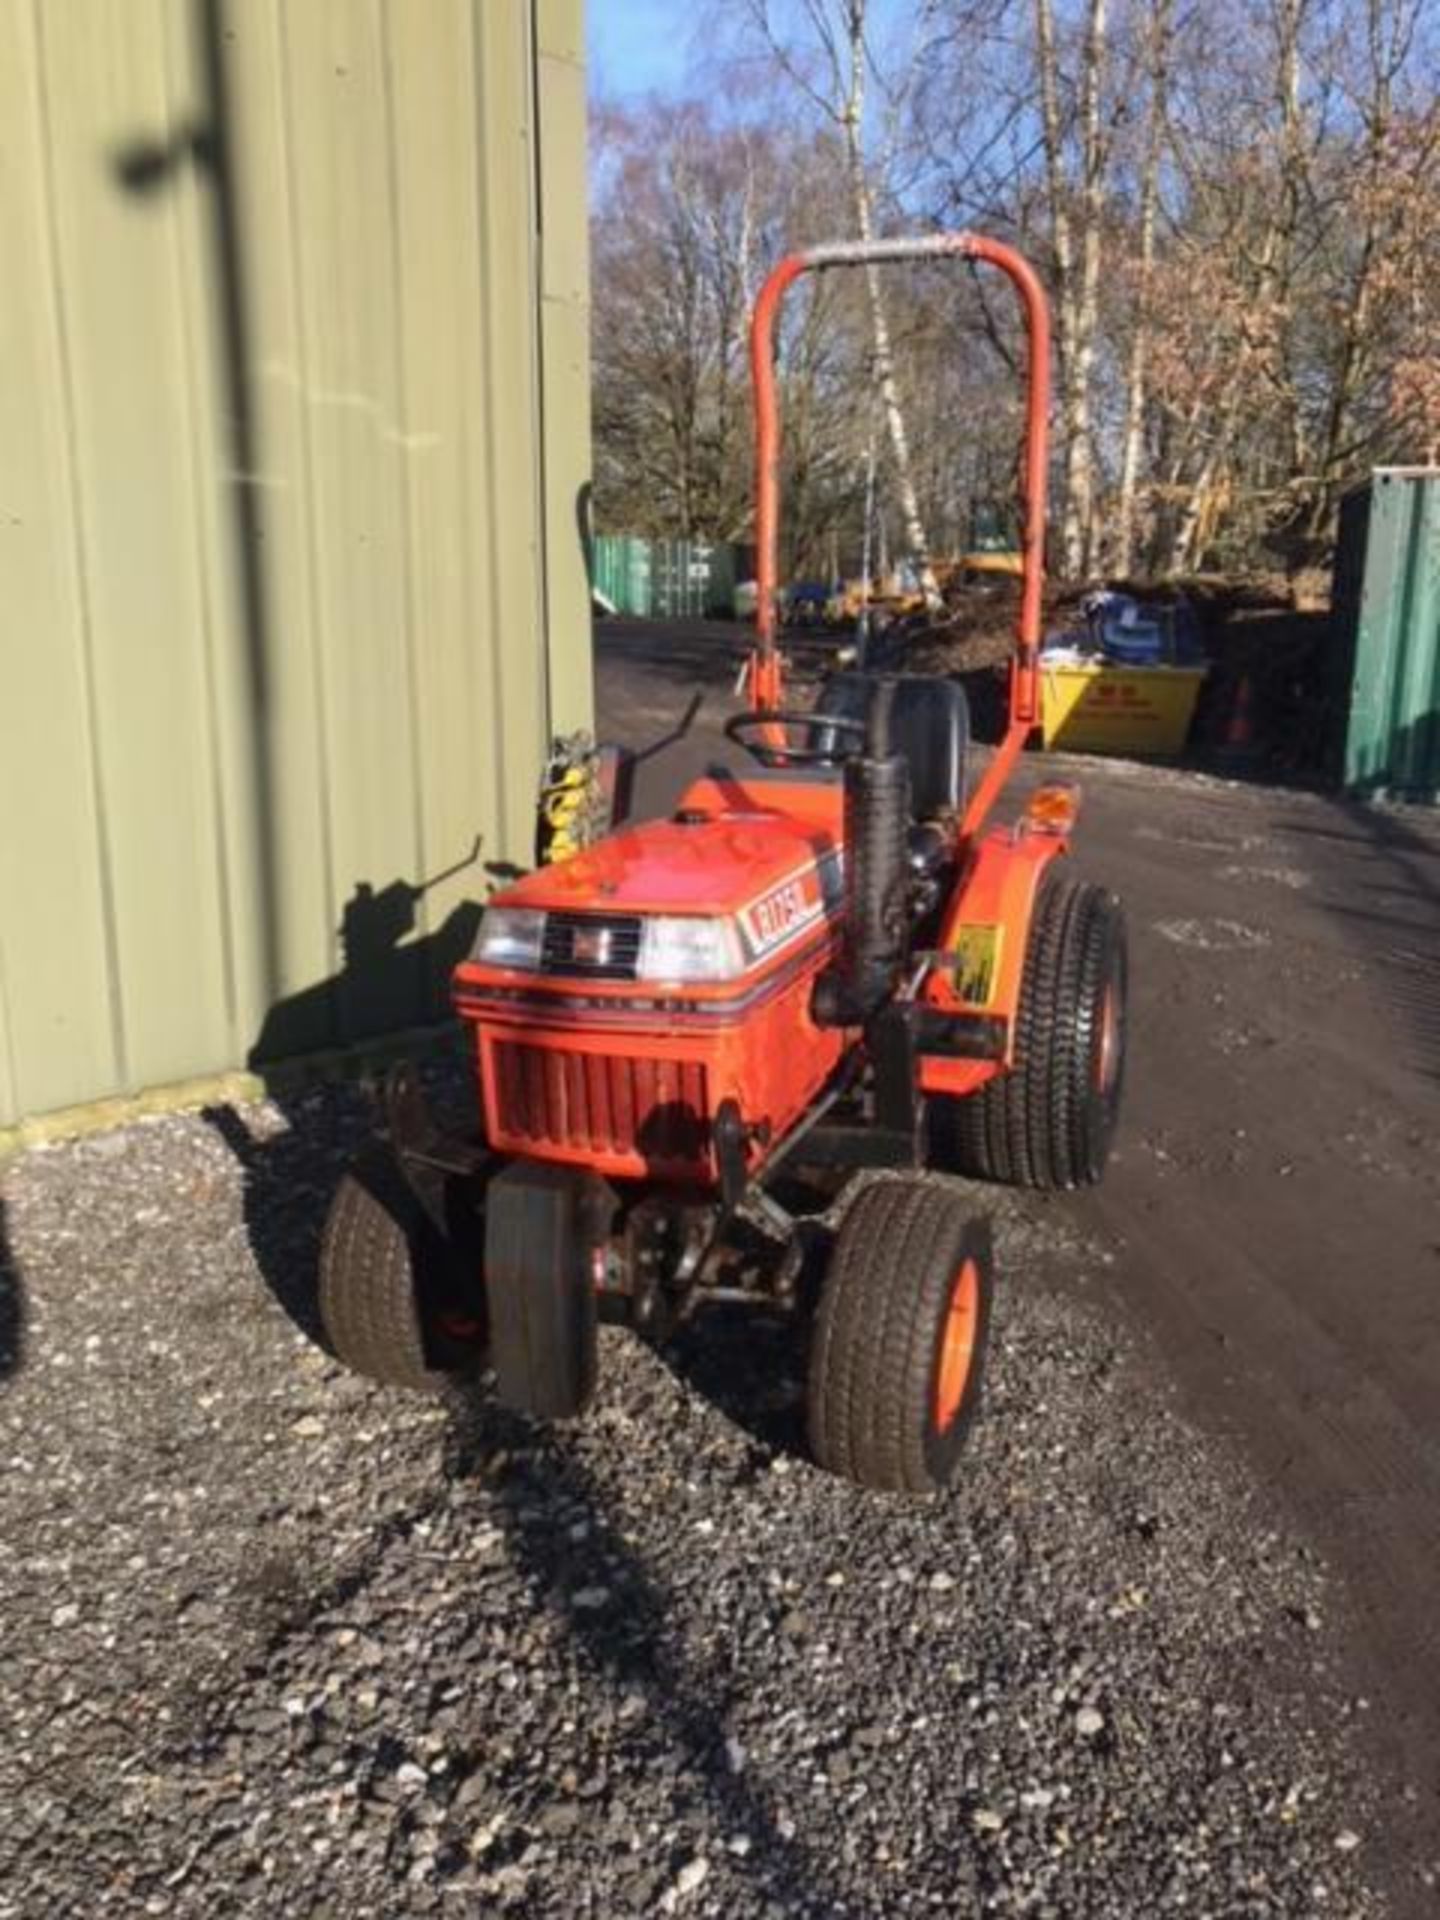 KUBOTA B1750 COMPACT TRACTOR SERIAL NO 67588 WITH LEWIS FORE END LOADER LEWIS BACK ACTOR (BOTH TAKEN